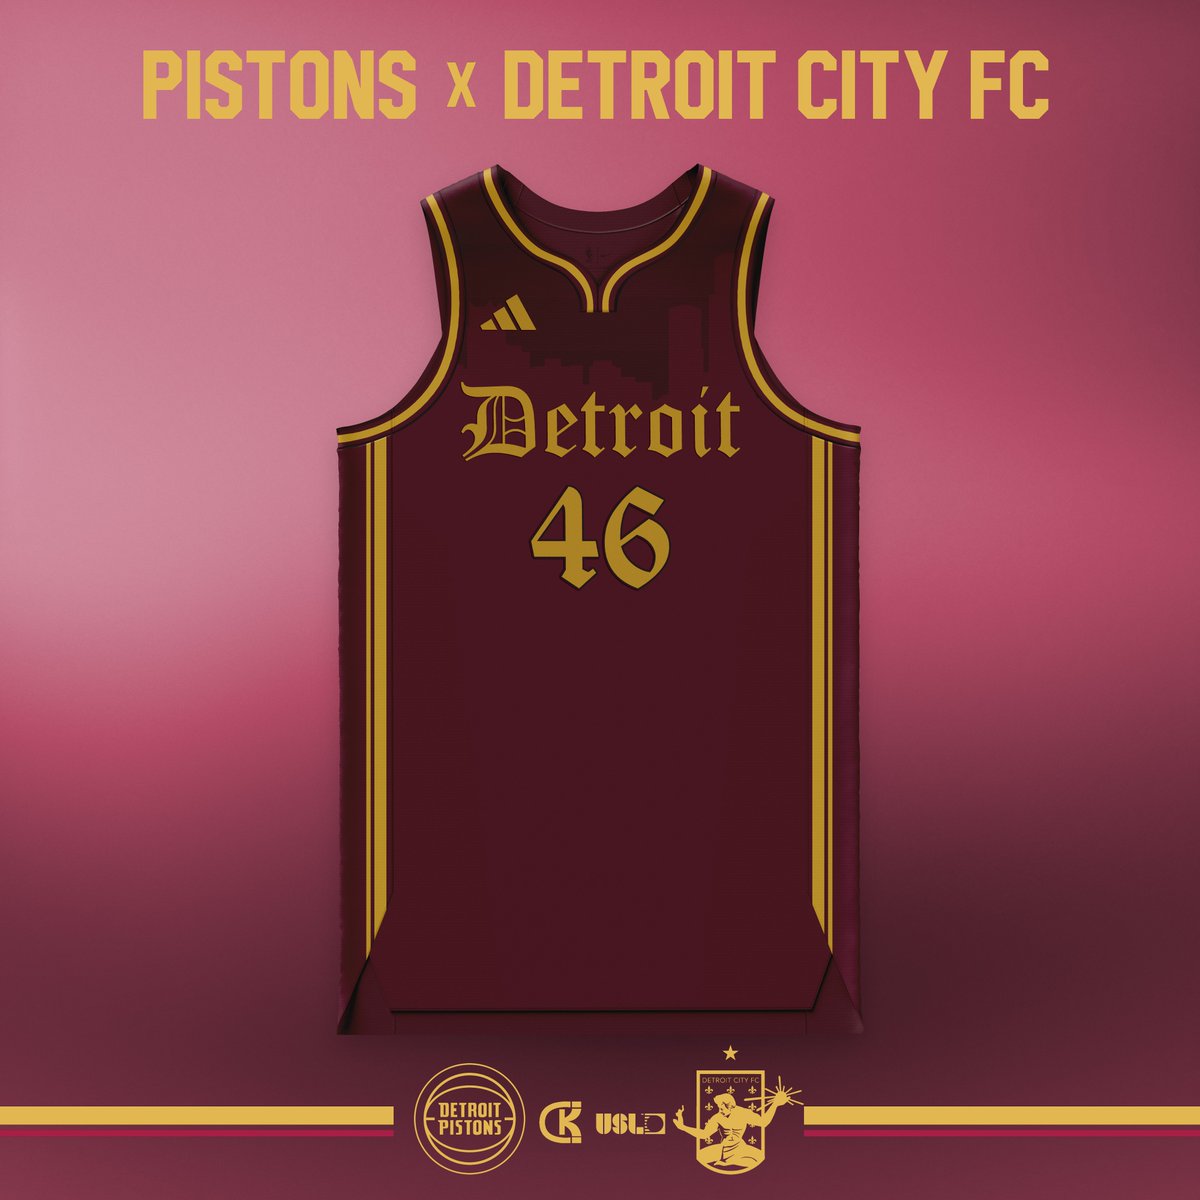 9/30: @DetroitPistons x @DetroitCityFC 

Keeping it classy with the maroon and gold color scheme with a subtle skyline adorning the top
Speeding it up to 1 a day now as well

#NBA #USL #pistons #detroitcity #detroitbasketball #jerseyconcept #nbajersey